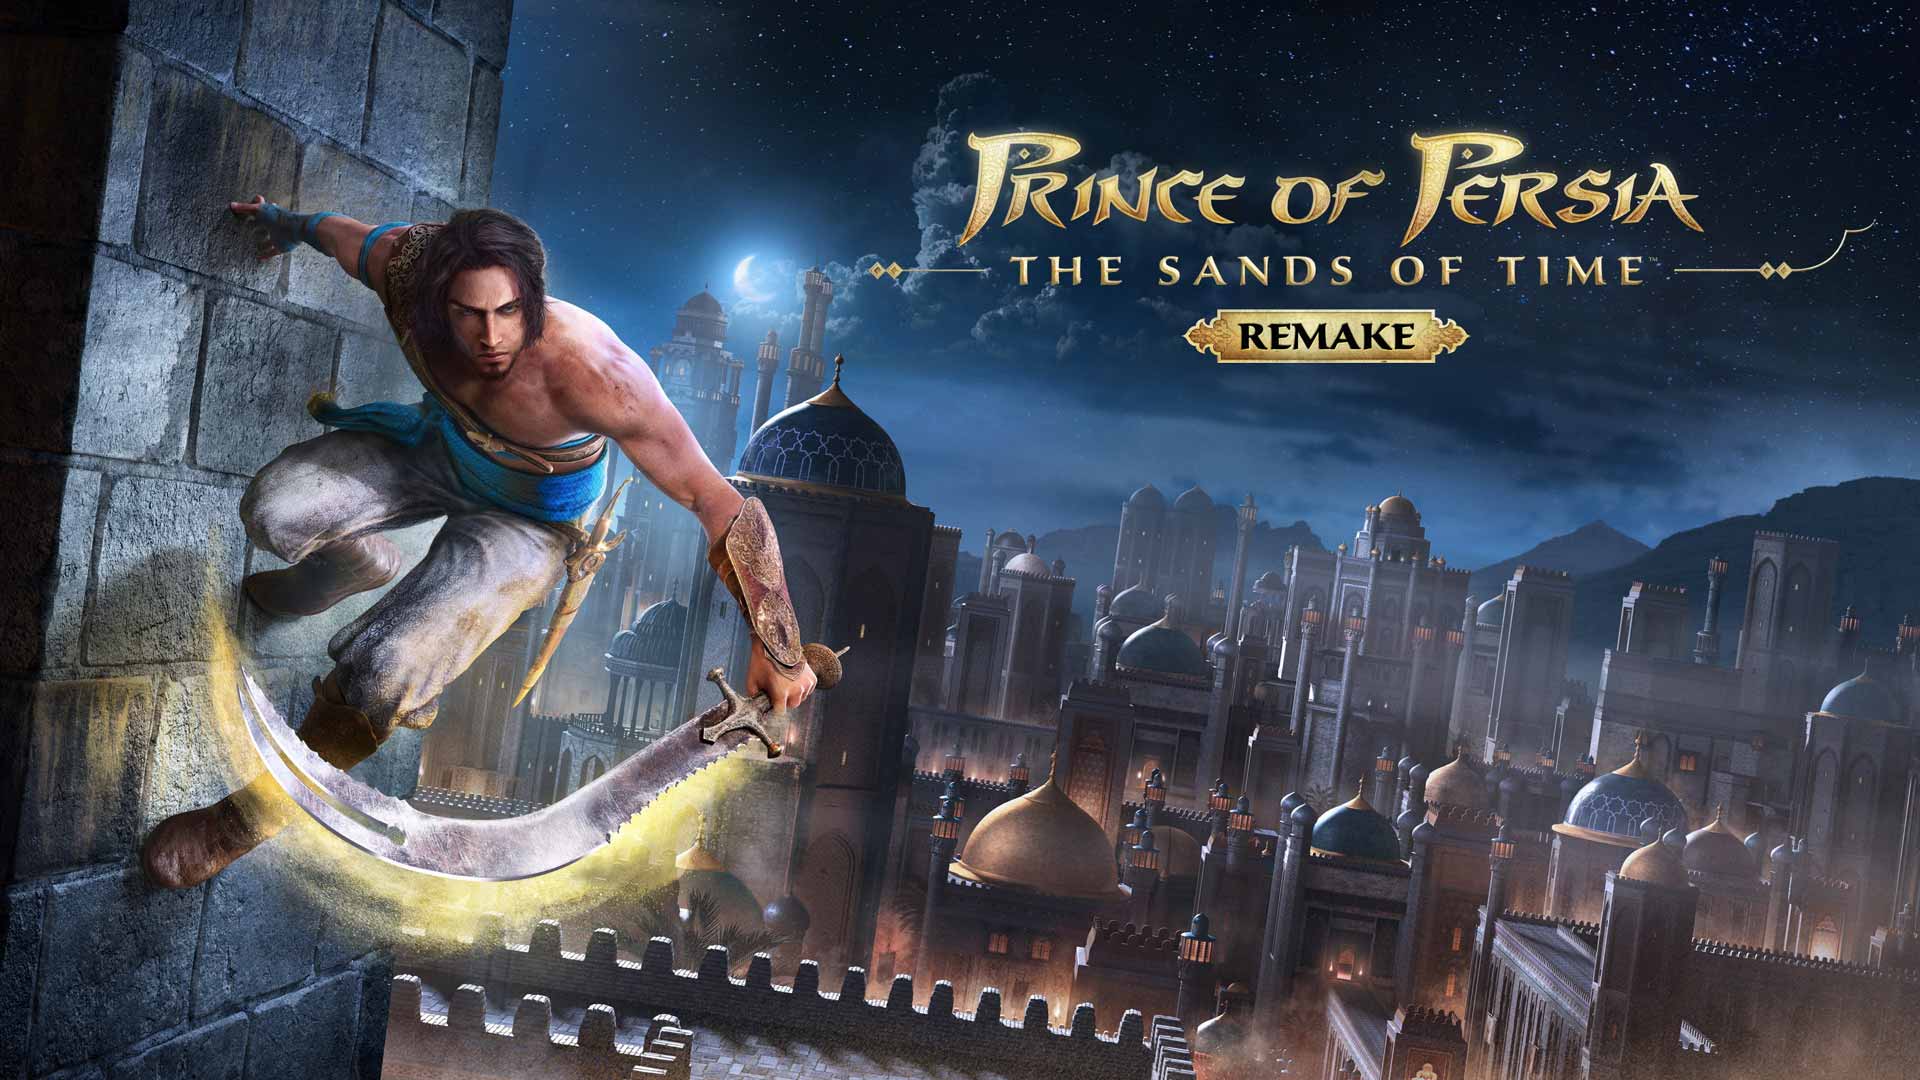 Prince of Persia The Sands of Time Remake achievements list revealed